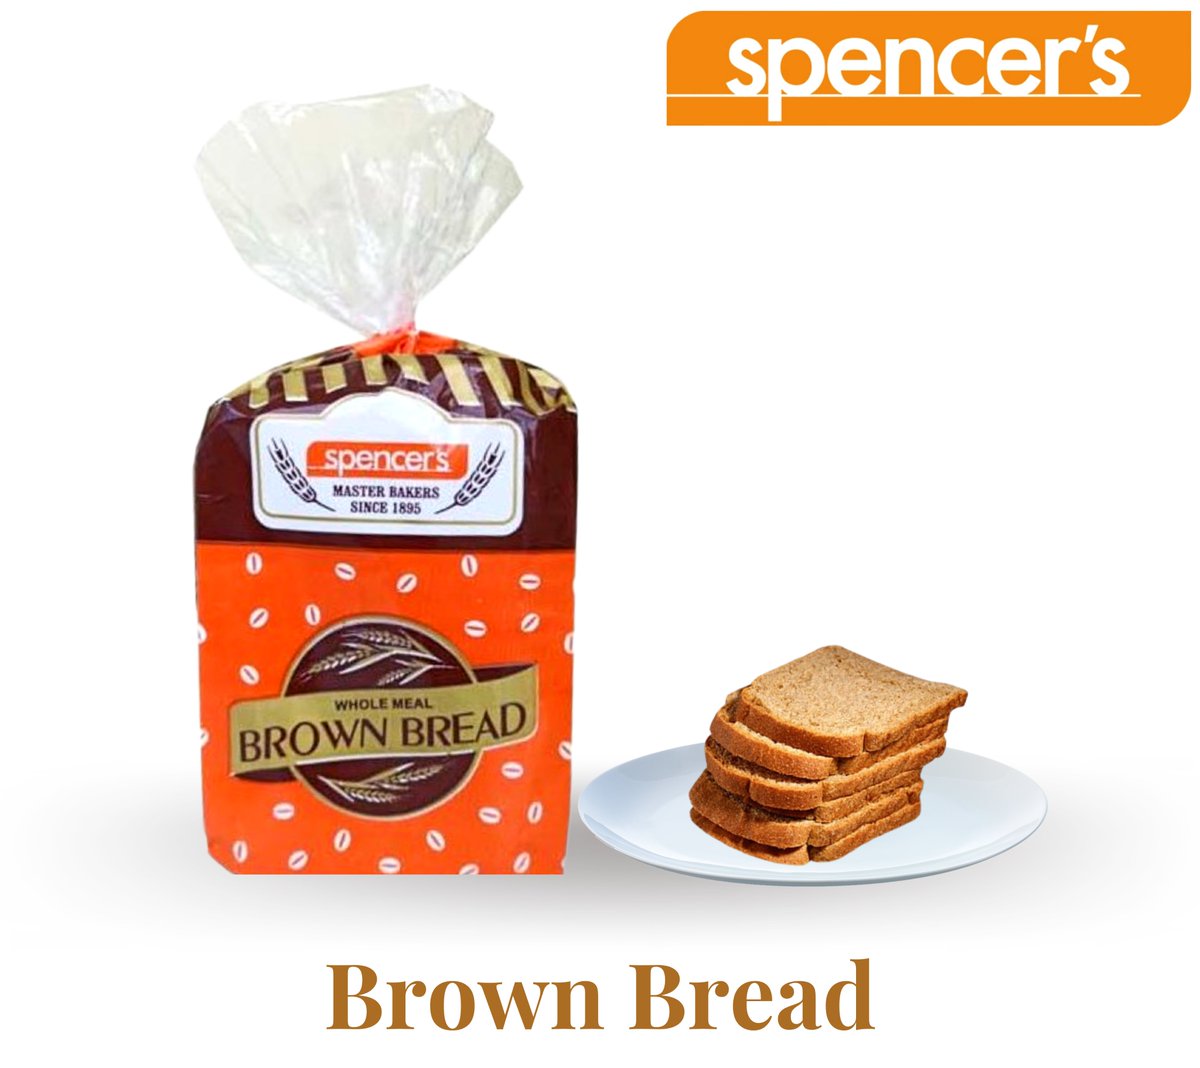 Spencer's Brown Bread is the perfect breakfast option for those looking for a healthy diet. With no added preservatives or chemicals.

For bulk orders of Spencer’s bread, contact us at @8093998404

#spencersbread #brownbread #softbread #freshbread